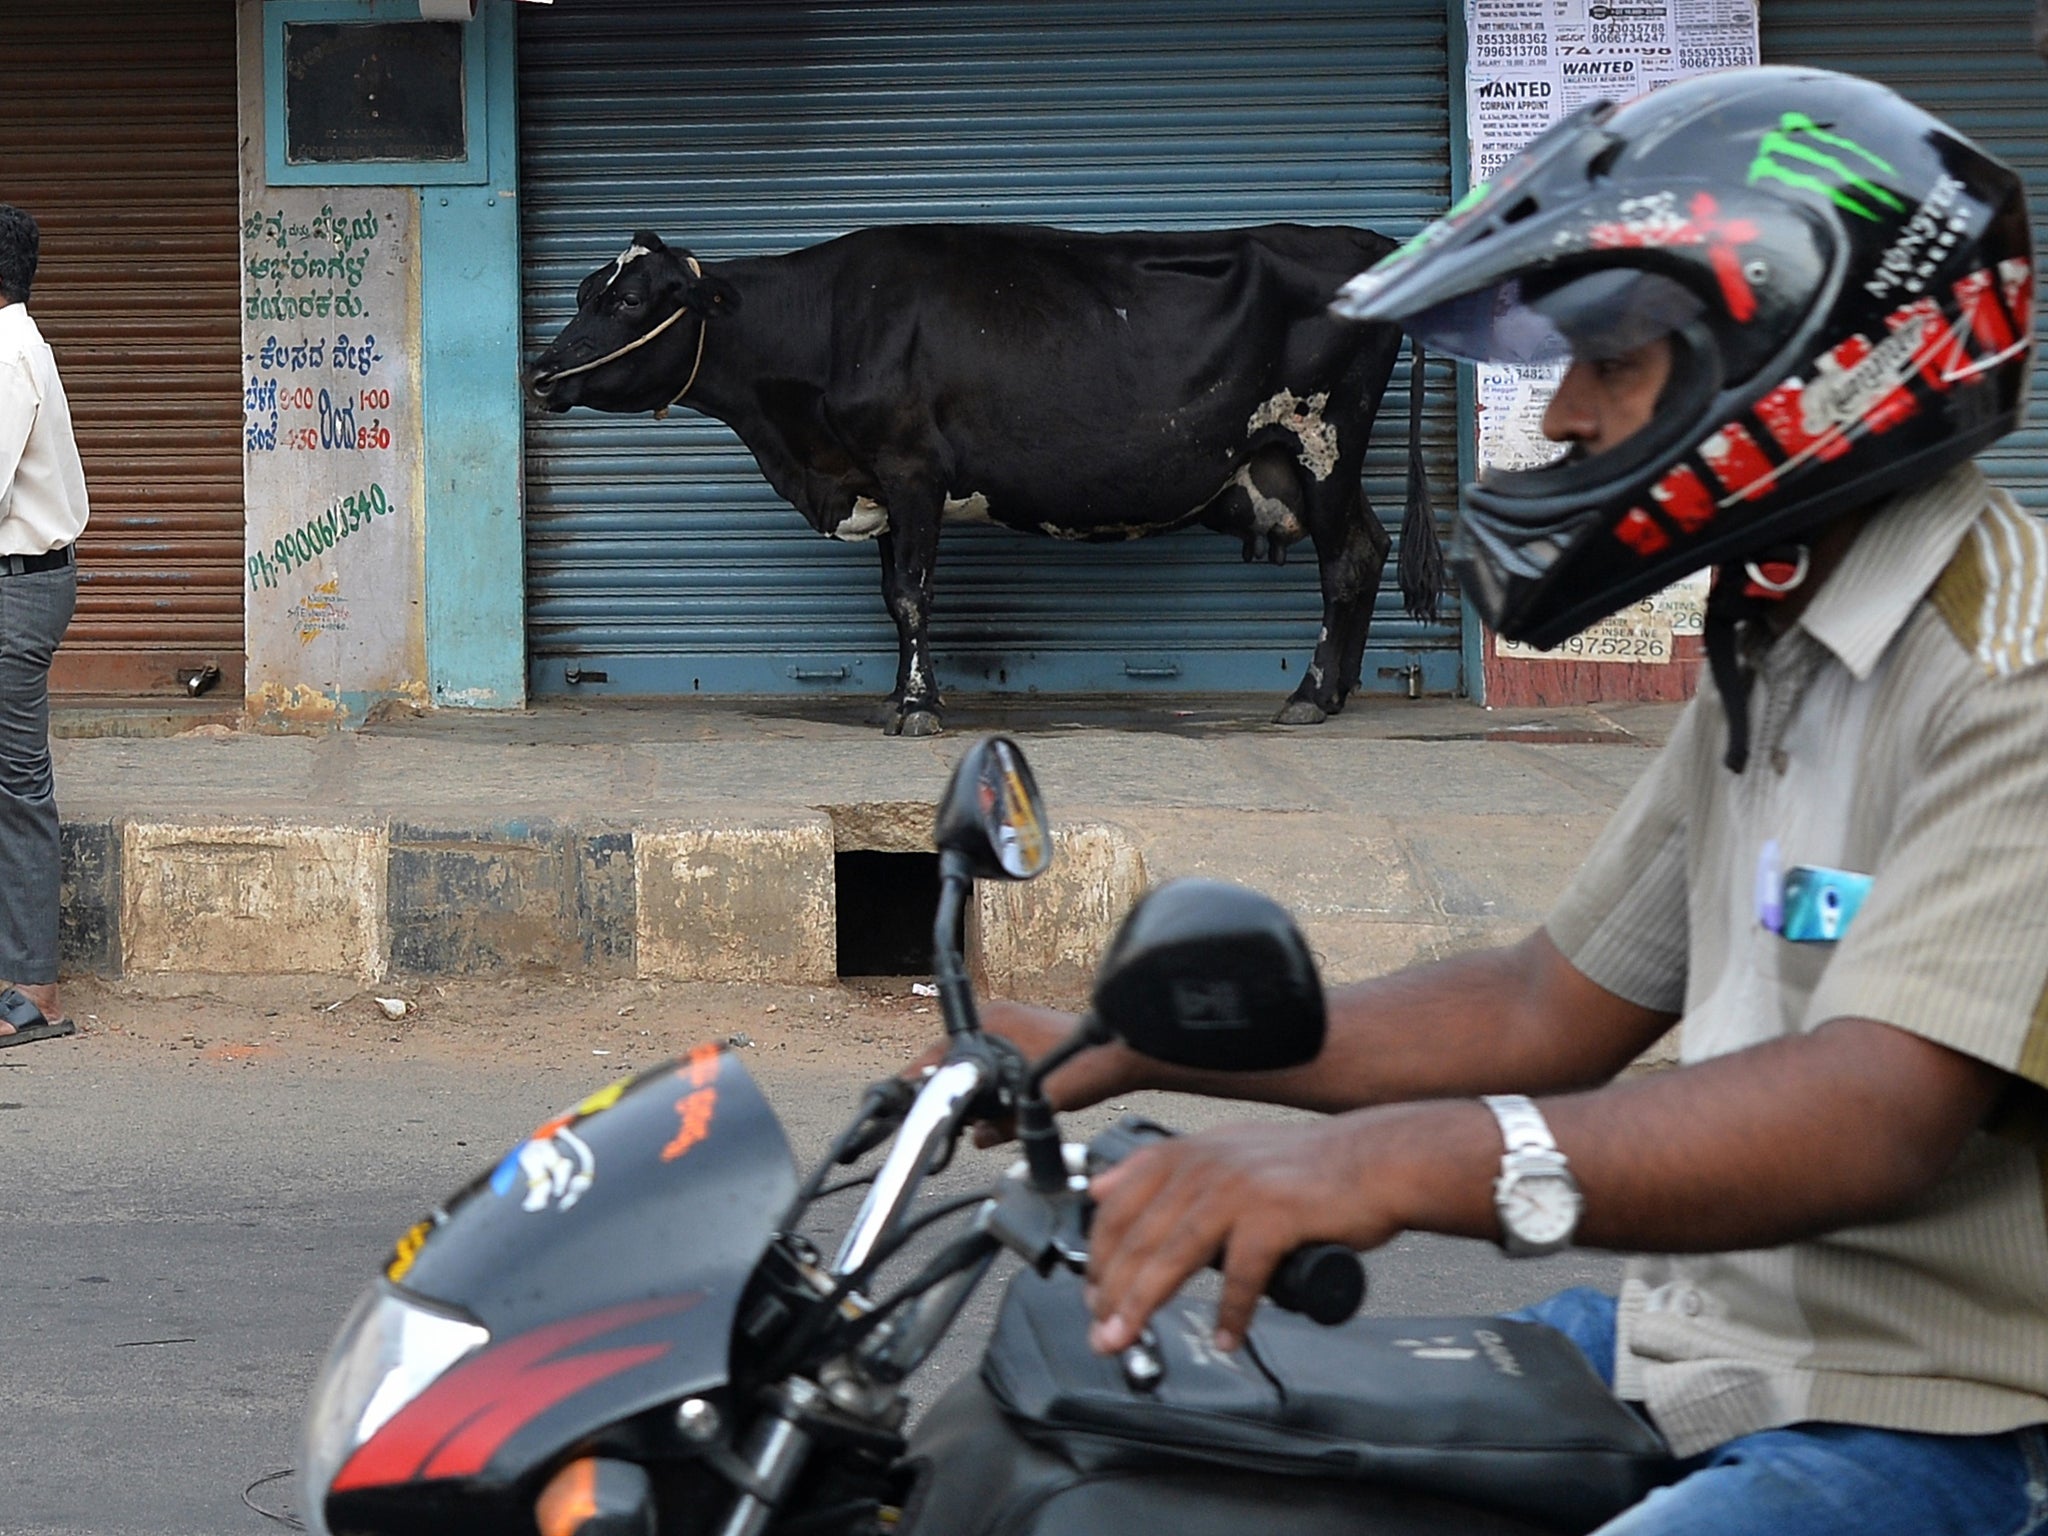 A cow stands next to a shuttered store as a biker rides past on a street in Bangalore